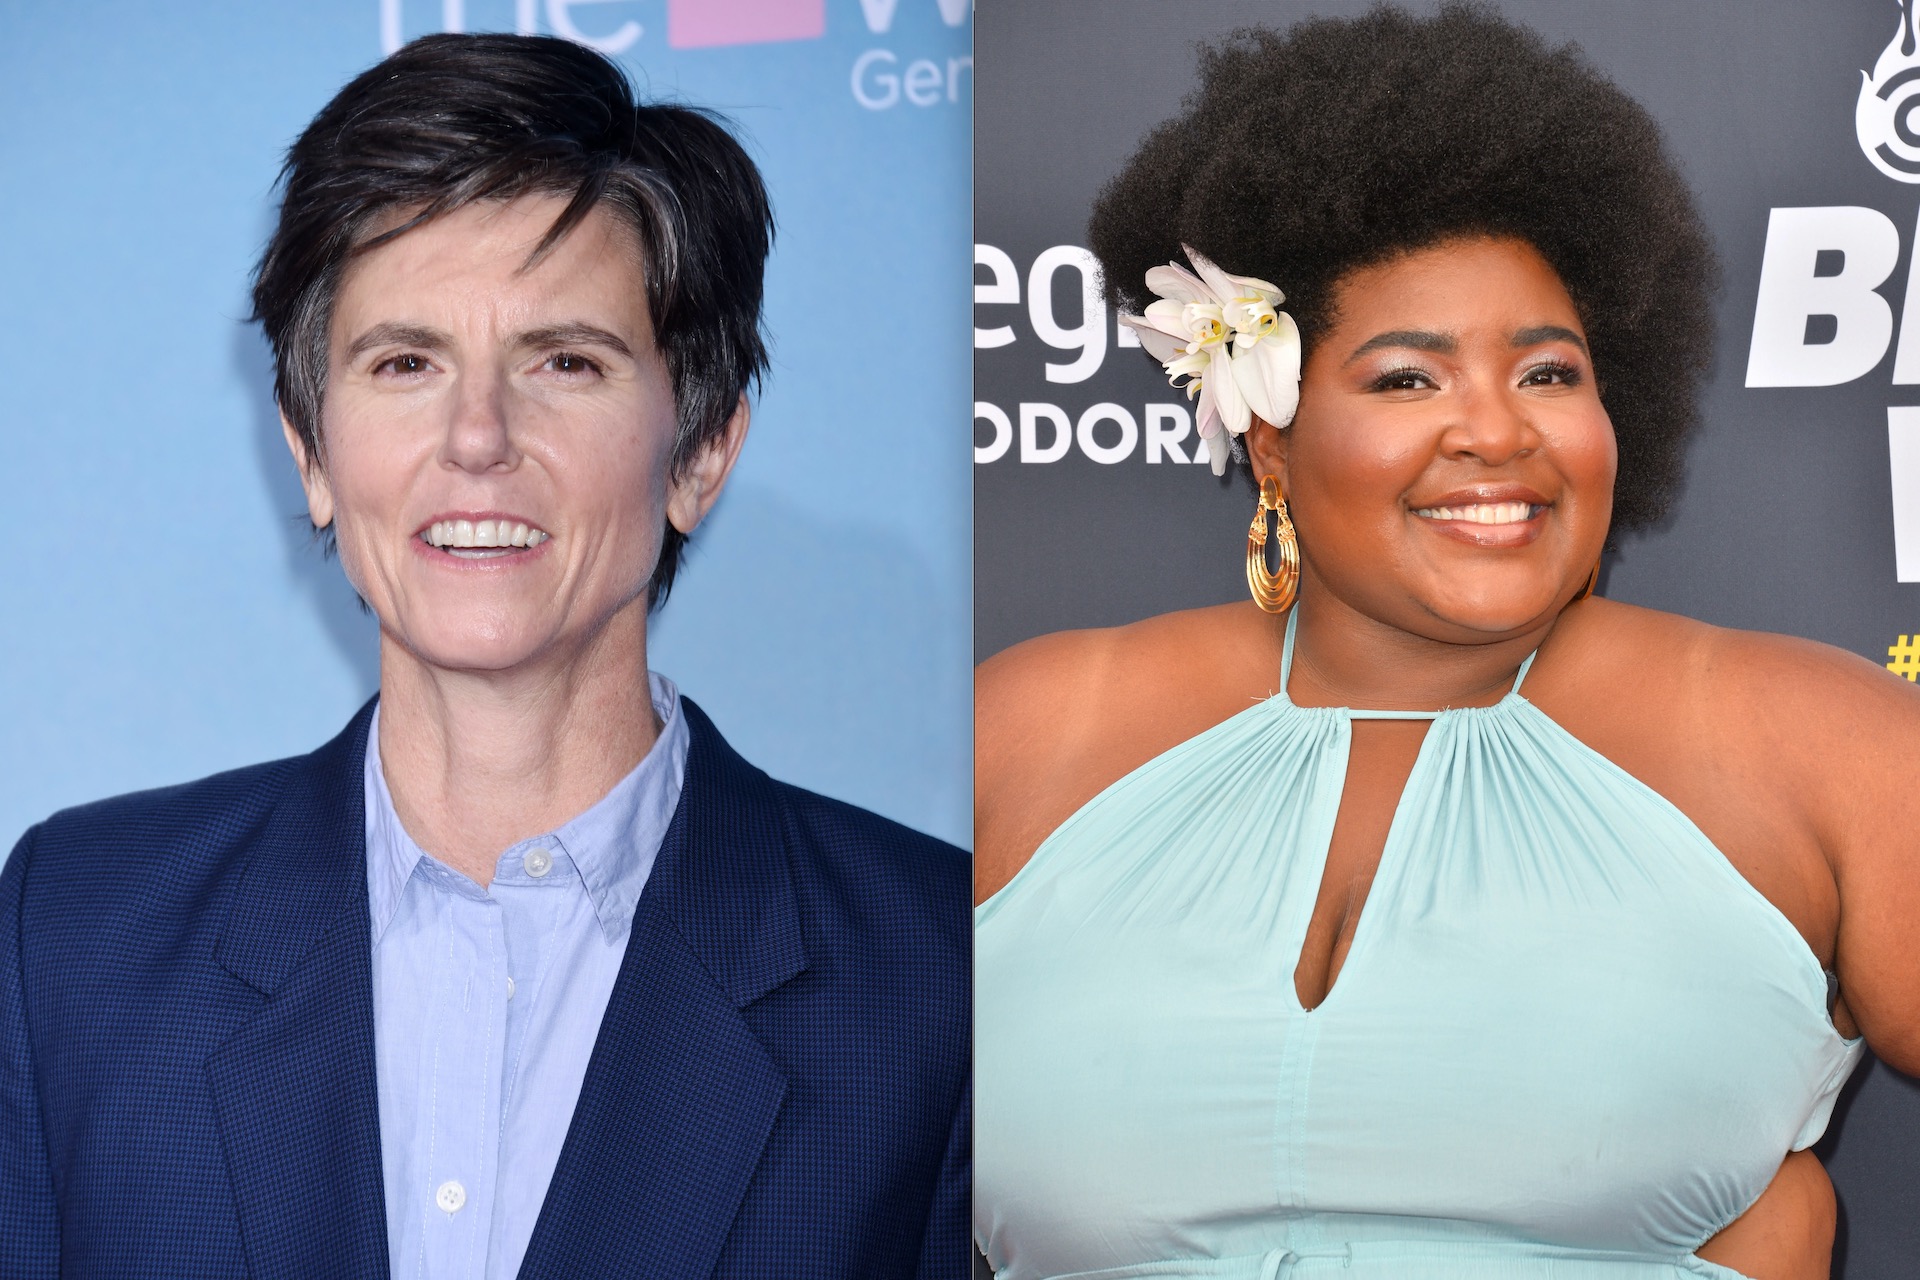 On August 9, it was announced that comedians Dulcé Sloan and Tig Notaro will be hosting the 2022 Hollywood Critics Association (HCA) TV Awards this year. The event takes place on August 13 and 14 at The Beverly Hilton. 